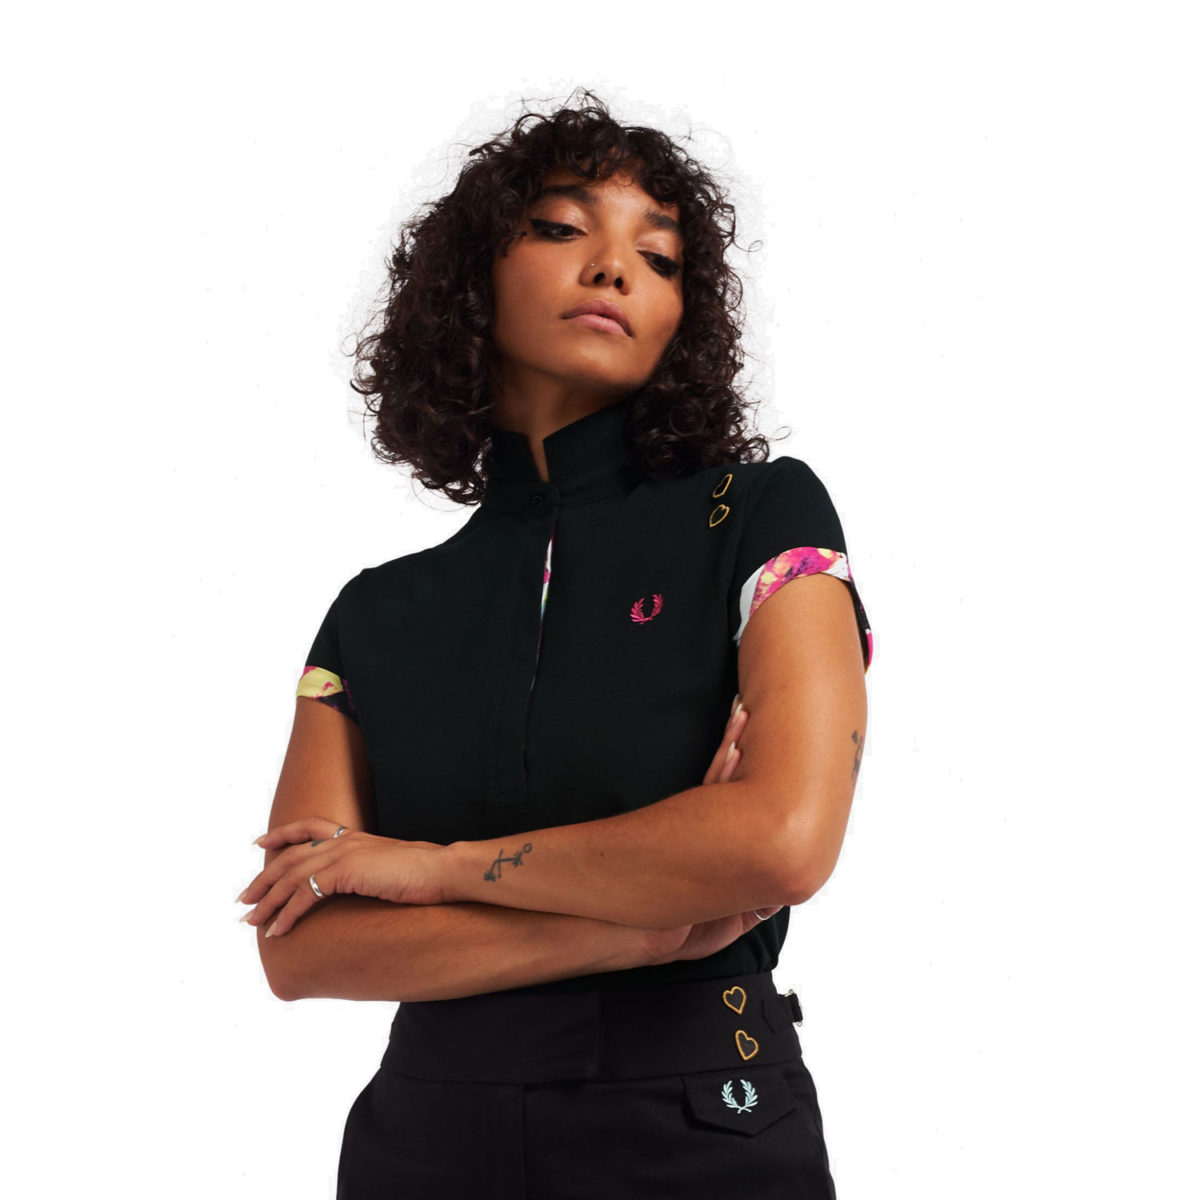 Fred Perry Women's X Amy Winehouse Contrast Trim Pique Polo - Black